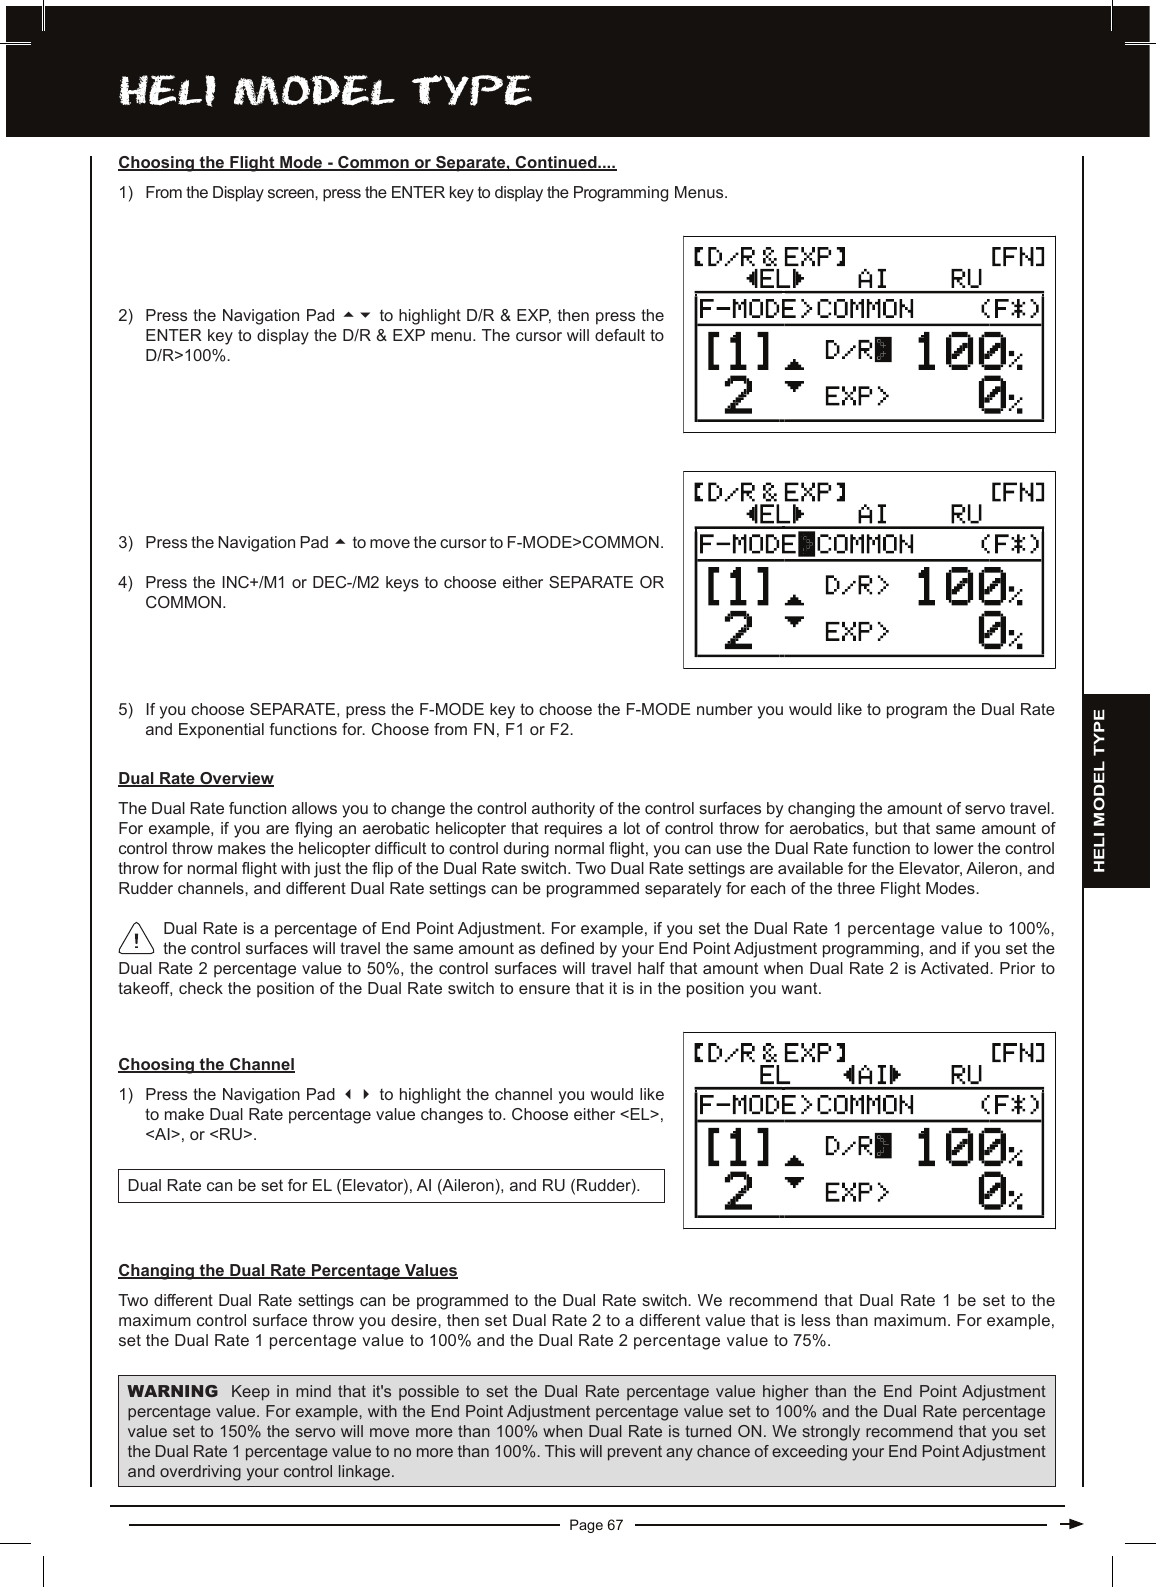 Page 67hELi MODEL TyPEDual Rate is a percentage of End Point Adjustment. For example, if you set the Dual Rate 1 percentage value to 100%, the control surfaces will travel the same amount as dened by your End Point Adjustment programming, and if you set the Dual Rate 2 percentage value to 50%, the control surfaces will travel half that amount when Dual Rate 2 is Activated. Prior to takeoff, check the position of the Dual Rate switch to ensure that it is in the position you want.Dual Rate OverviewThe Dual Rate function allows you to change the control authority of the control surfaces by changing the amount of servo travel. For example, if you are ying an aerobatic helicopter that requires a lot of control throw for aerobatics, but that same amount of control throw makes the helicopter difcult to control during normal ight, you can use the Dual Rate function to lower the control throw for normal ight with just the ip of the Dual Rate switch. Two Dual Rate settings are available for the Elevator, Aileron, and Rudder channels, and different Dual Rate settings can be programmed separately for each of the three Flight Modes.Choosing the Channel1) Press the Navigation Pad 34 to highlight the channel you would like to make Dual Rate percentage value changes to. Choose either &lt;EL&gt;, &lt;AI&gt;, or &lt;RU&gt;.Dual Rate can be set for EL (Elevator), AI (Aileron), and RU (Rudder).2) Press the Navigation Pad 56 to highlight D/R &amp; EXP, then press the ENTER key to display the D/R &amp; EXP menu. The cursor will default to D/R&gt;100%.3) Press the Navigation Pad 5to move the cursor to F-MODE&gt;COMMON.4) Press the INC+/M1 or DEC-/M2 keys to choose either SEPARATE OR COMMON.5) If you choose SEPARATE, press the F-MODE key to choose the F-MODE number you would like to program the Dual Rate and Exponential functions for. Choose from FN, F1 or F2.Choosing the Flight Mode - Common or Separate, Continued....1) From the Display screen, press the ENTER key to display the Programming Menus.Changing the Dual Rate Percentage ValuesTwo different Dual Rate settings can be programmed to the Dual Rate switch. We recommend that Dual Rate 1 be set to the maximum control surface throw you desire, then set Dual Rate 2 to a different value that is less than maximum. For example, set the Dual Rate 1 percentage value to 100% and the Dual Rate 2 percentage value to 75%.WARNING Keep in  mind  that  it&apos;s possible to set the  Dual  Rate  percentage value higher than  the  End  Point Adjustment percentage value. For example, with the End Point Adjustment percentage value set to 100% and the Dual Rate percentage value set to 150% the servo will move more than 100% when Dual Rate is turned ON. We strongly recommend that you set the Dual Rate 1 percentage value to no more than 100%. This will prevent any chance of exceeding your End Point Adjustment and overdriving your control linkage.HELI MODEL TYPE